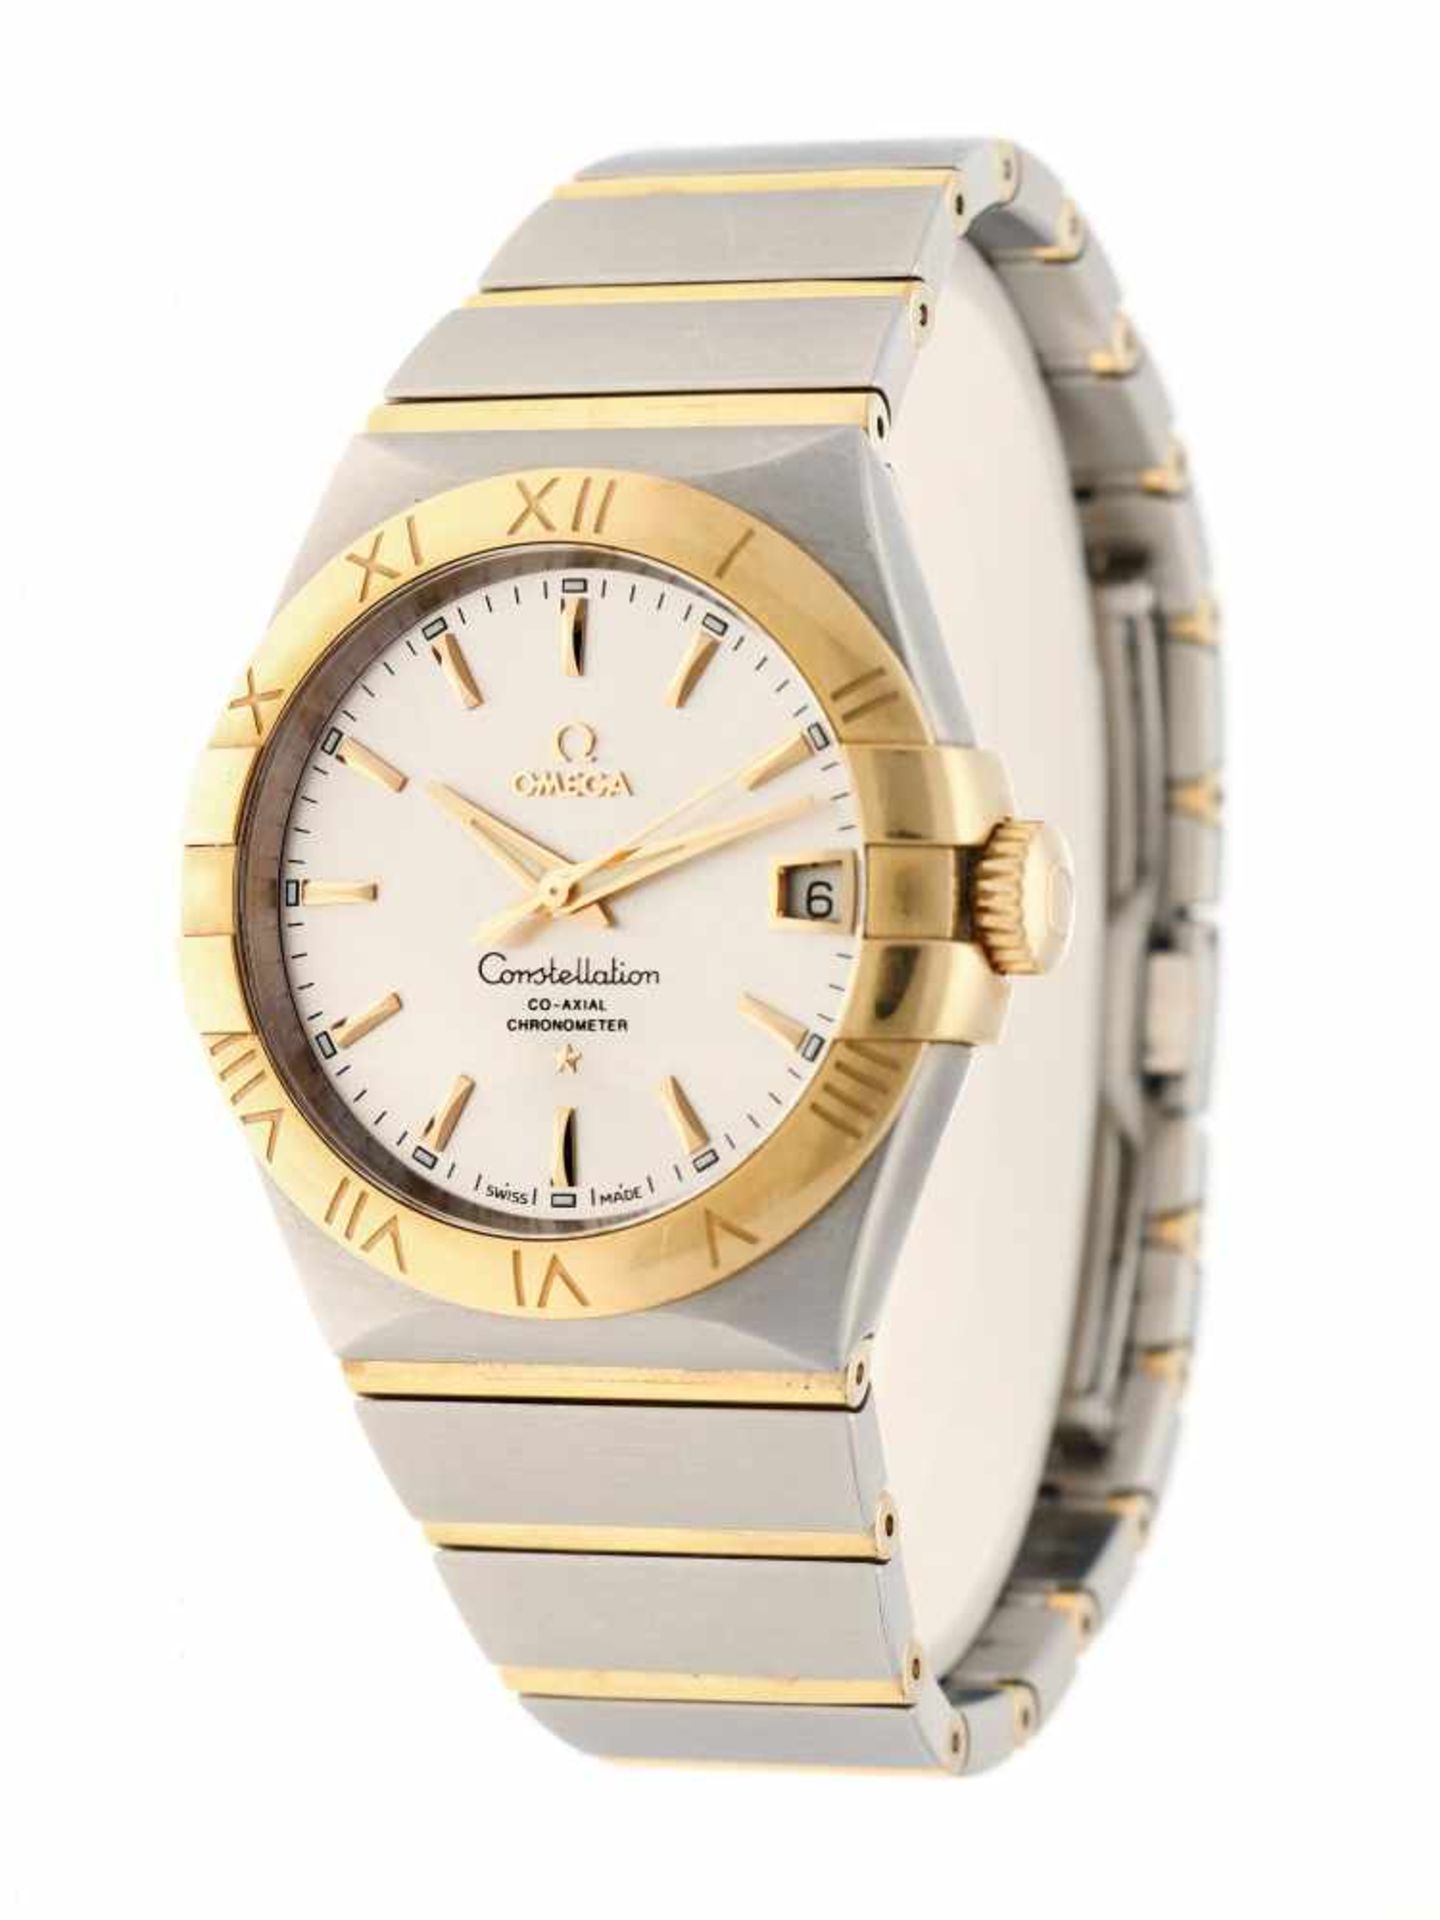 Omega Constellation Co-Axial - Men's watch - Automatic - Ca. 2011. - Bild 2 aus 6